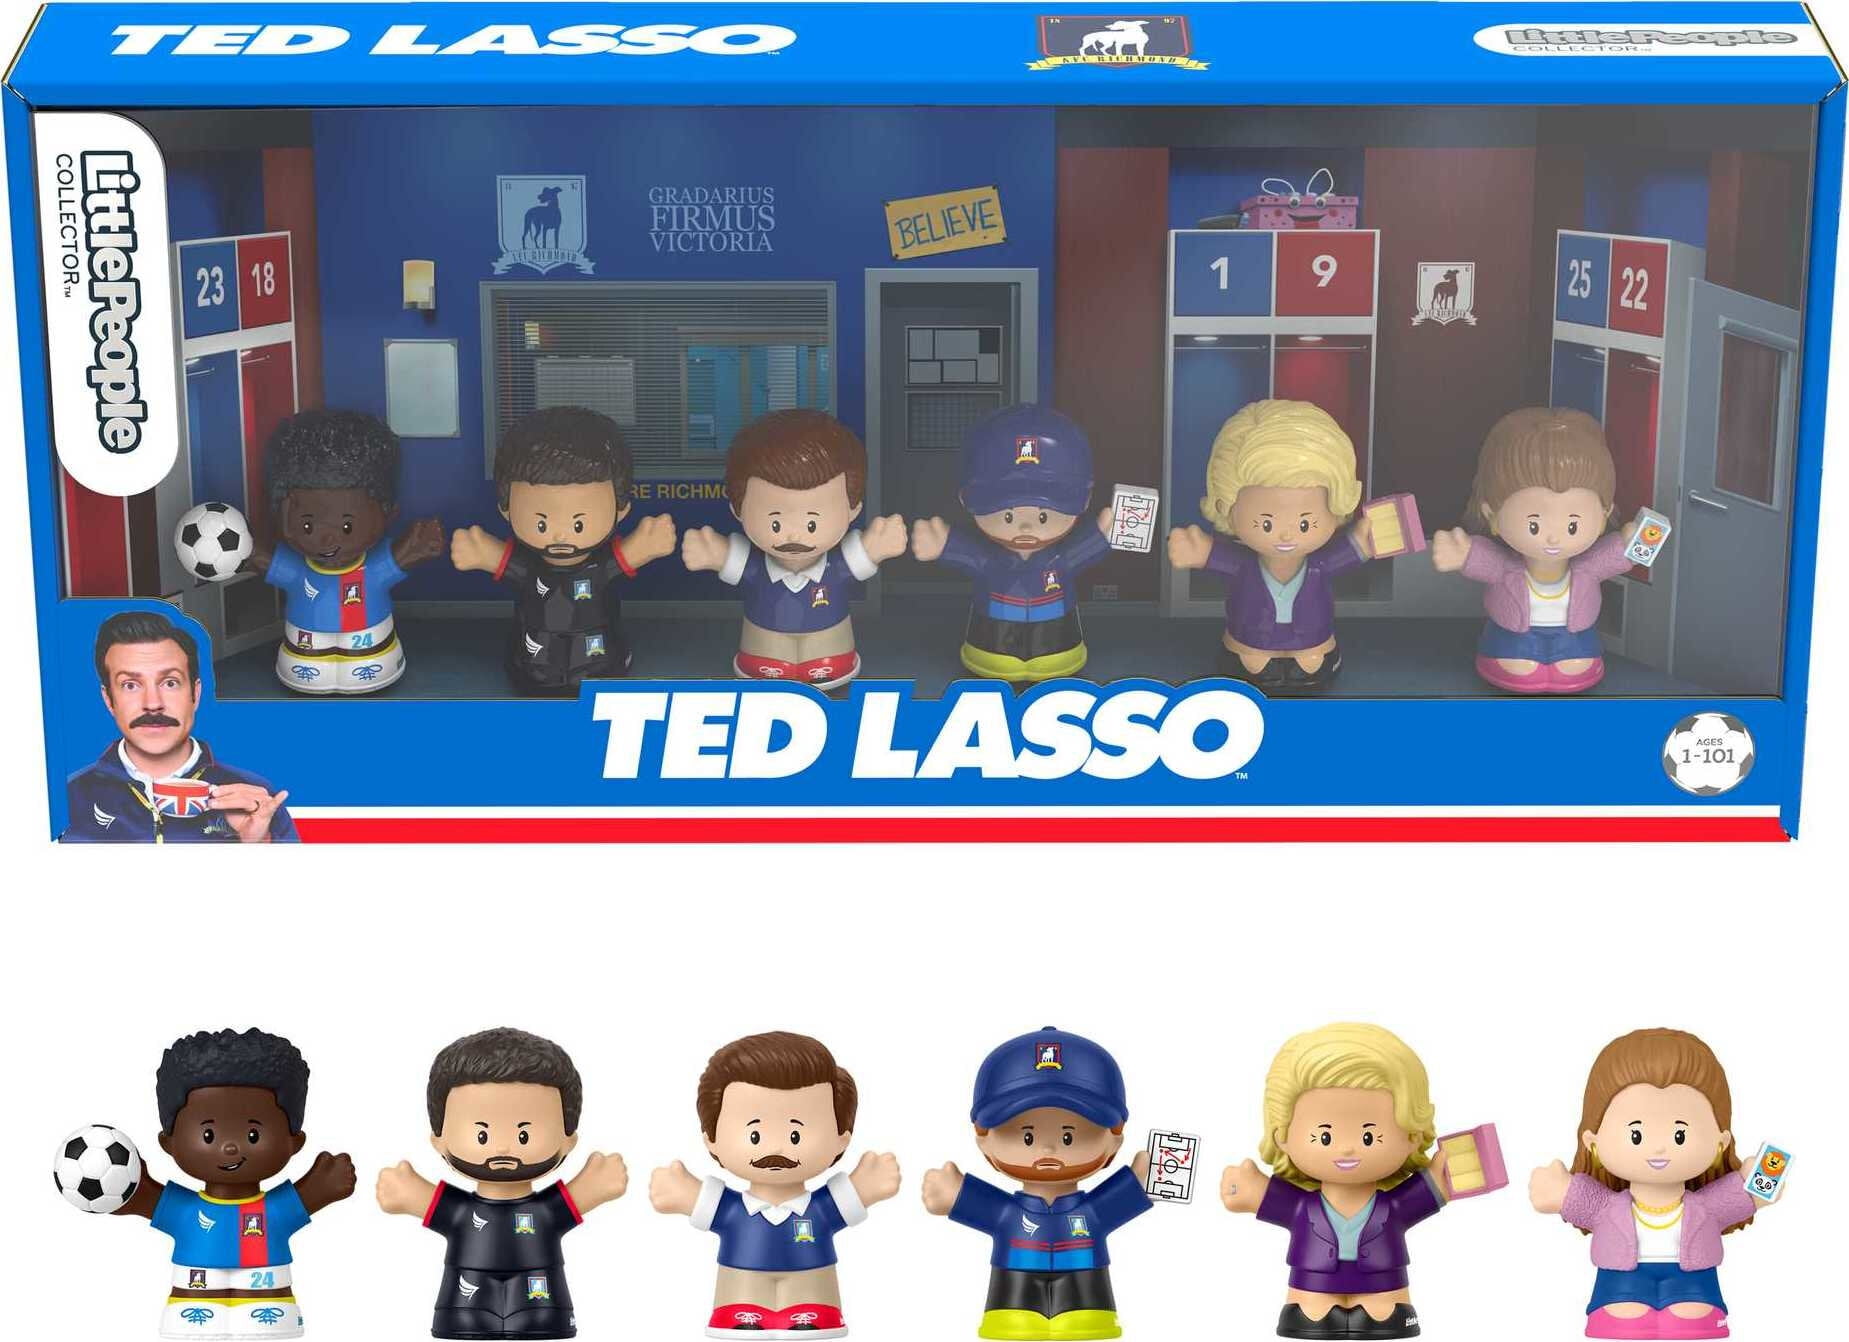 6-Piece Little People Collector Ted Lasso Special Edition Figures $7.69 + Free S&H w/ Walmart+ or $35+